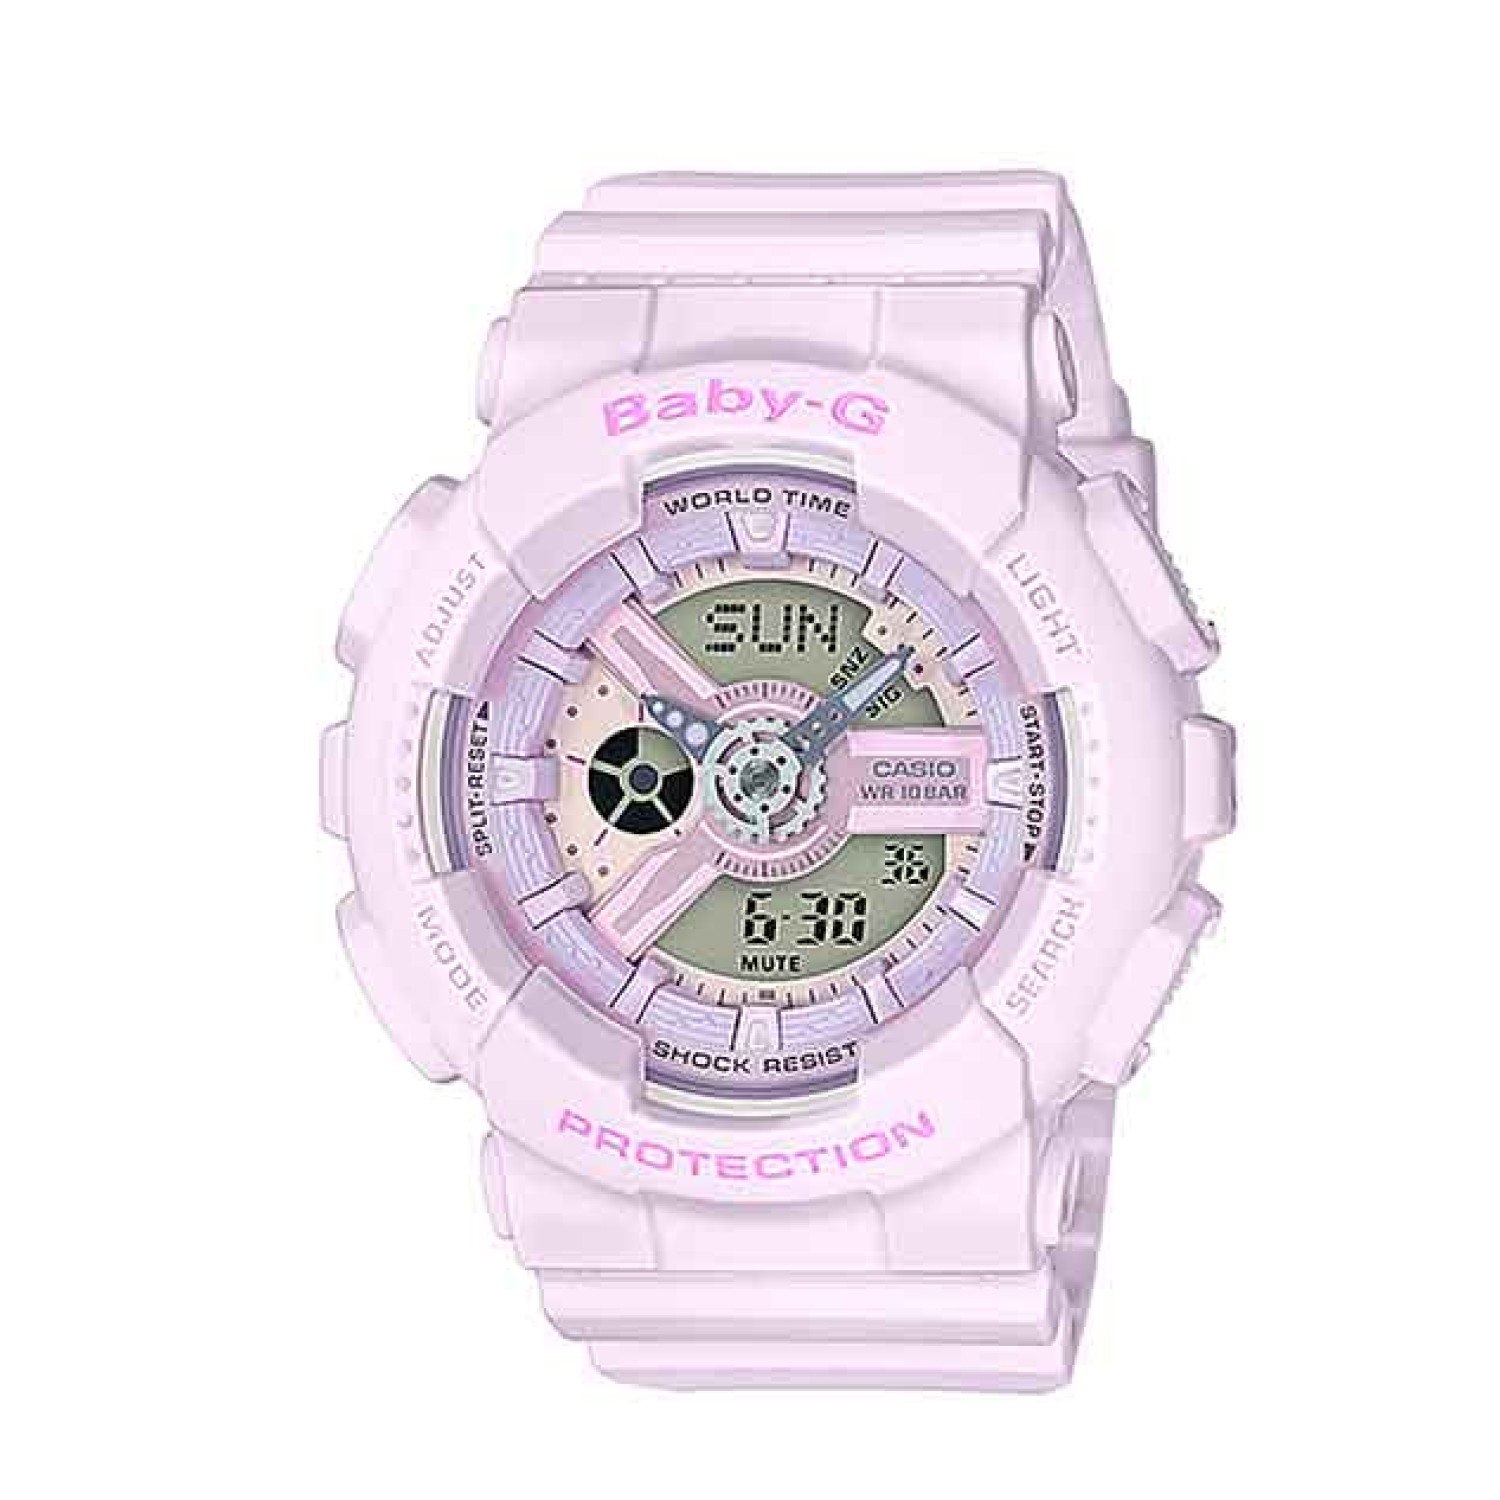 BA110-4A2 Casio BabY-G  Pink Colour Series Watch.   Presenting a new flower-image Pink Colour Series model casual BABY-G watches for active women of today. These models feature pink colouring in various shades, like a bouquet of flowers. The matte finish 